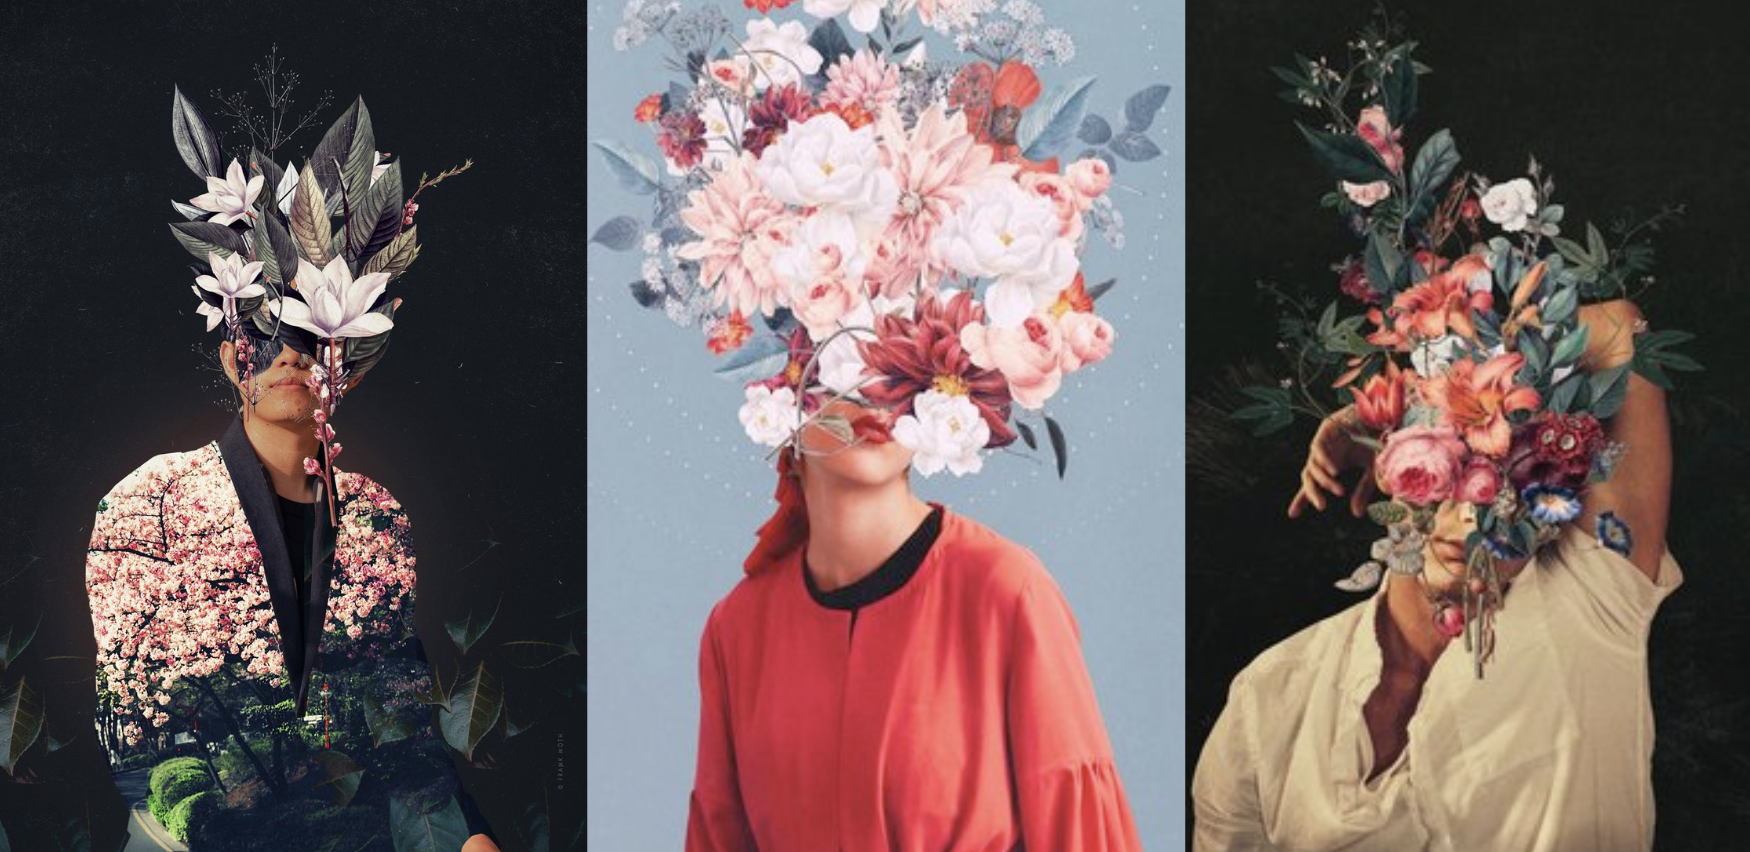 Image with 3 individuals who have bouquets of flowers growing out of their heads. 